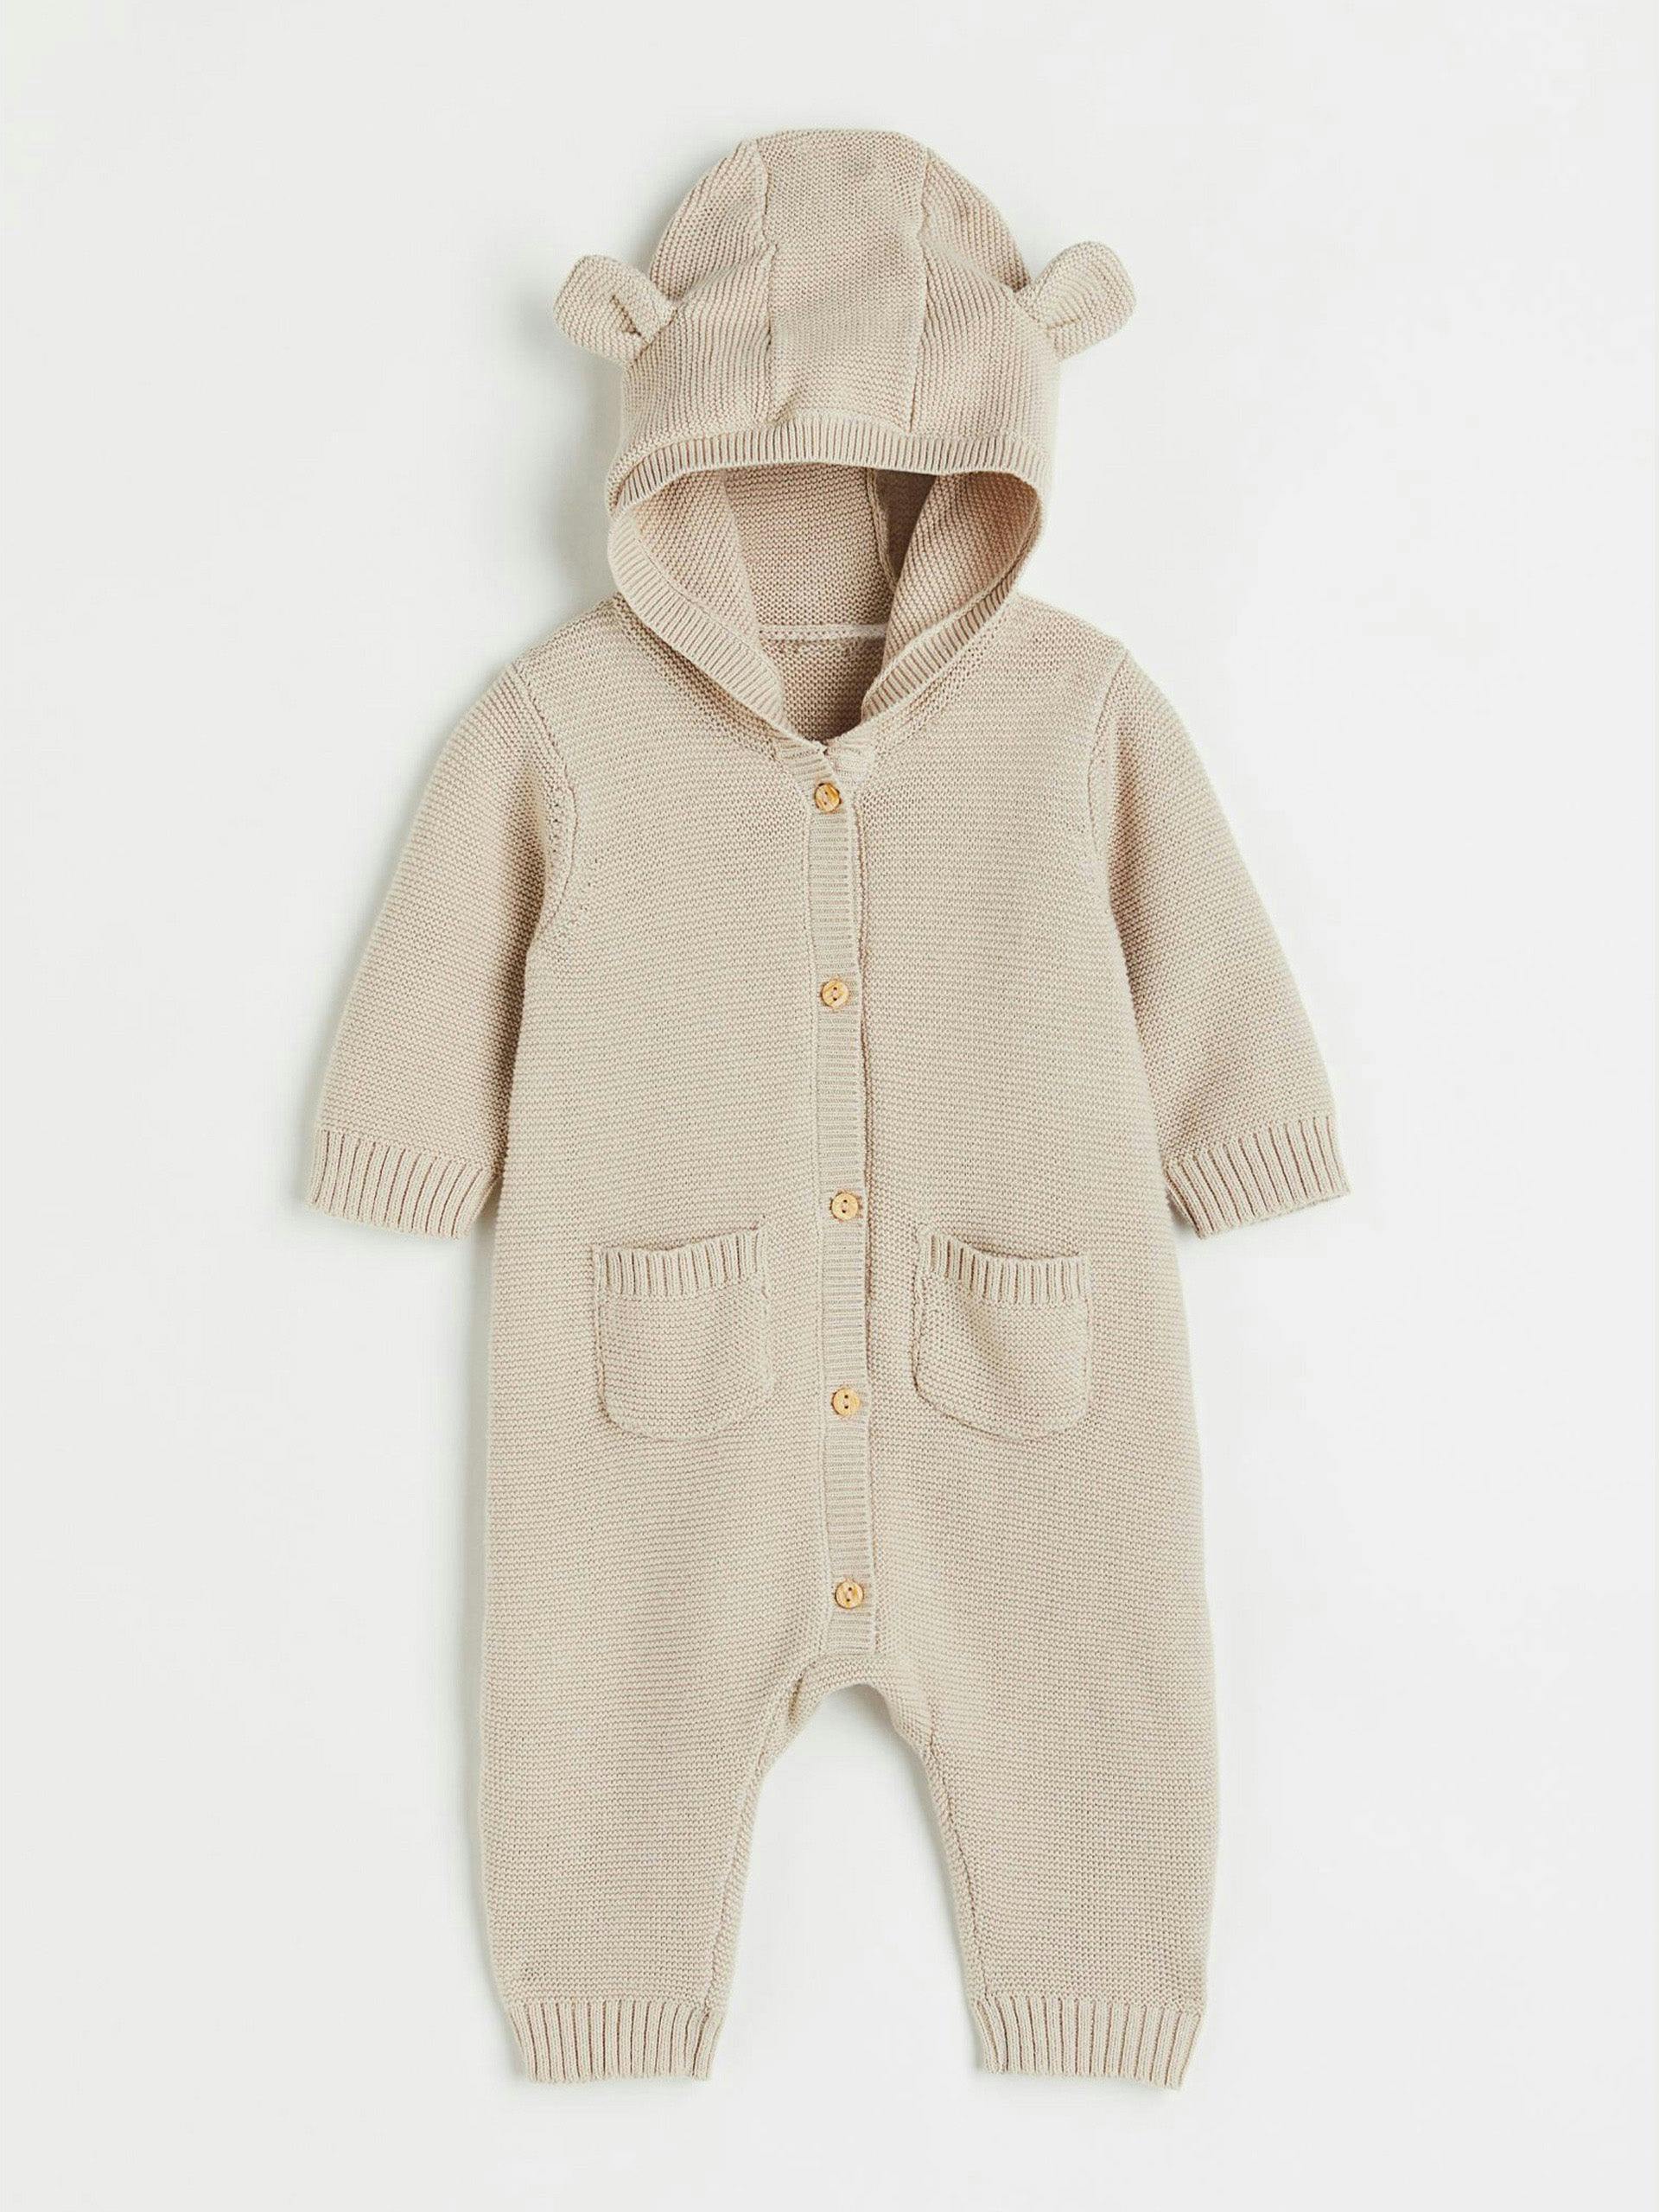 Knitted cotton all-in-one suit